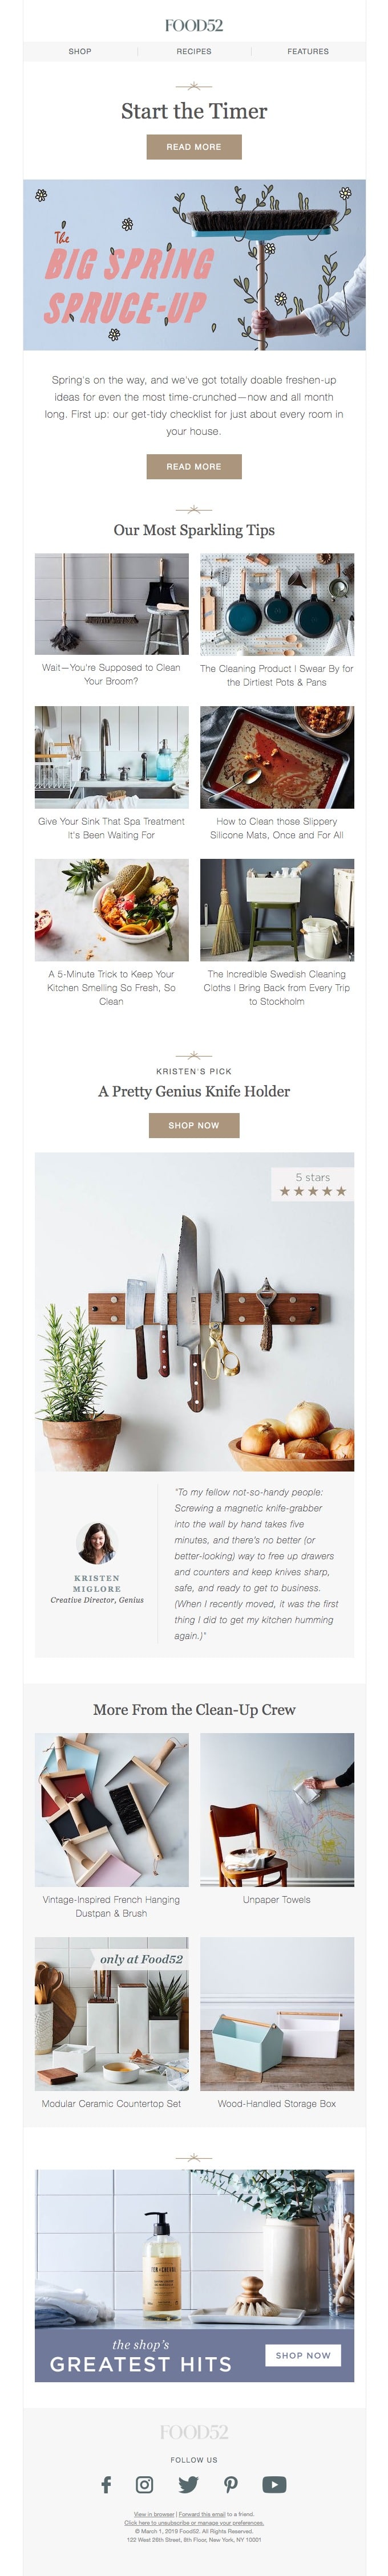 Food52 Spring Cleaning email